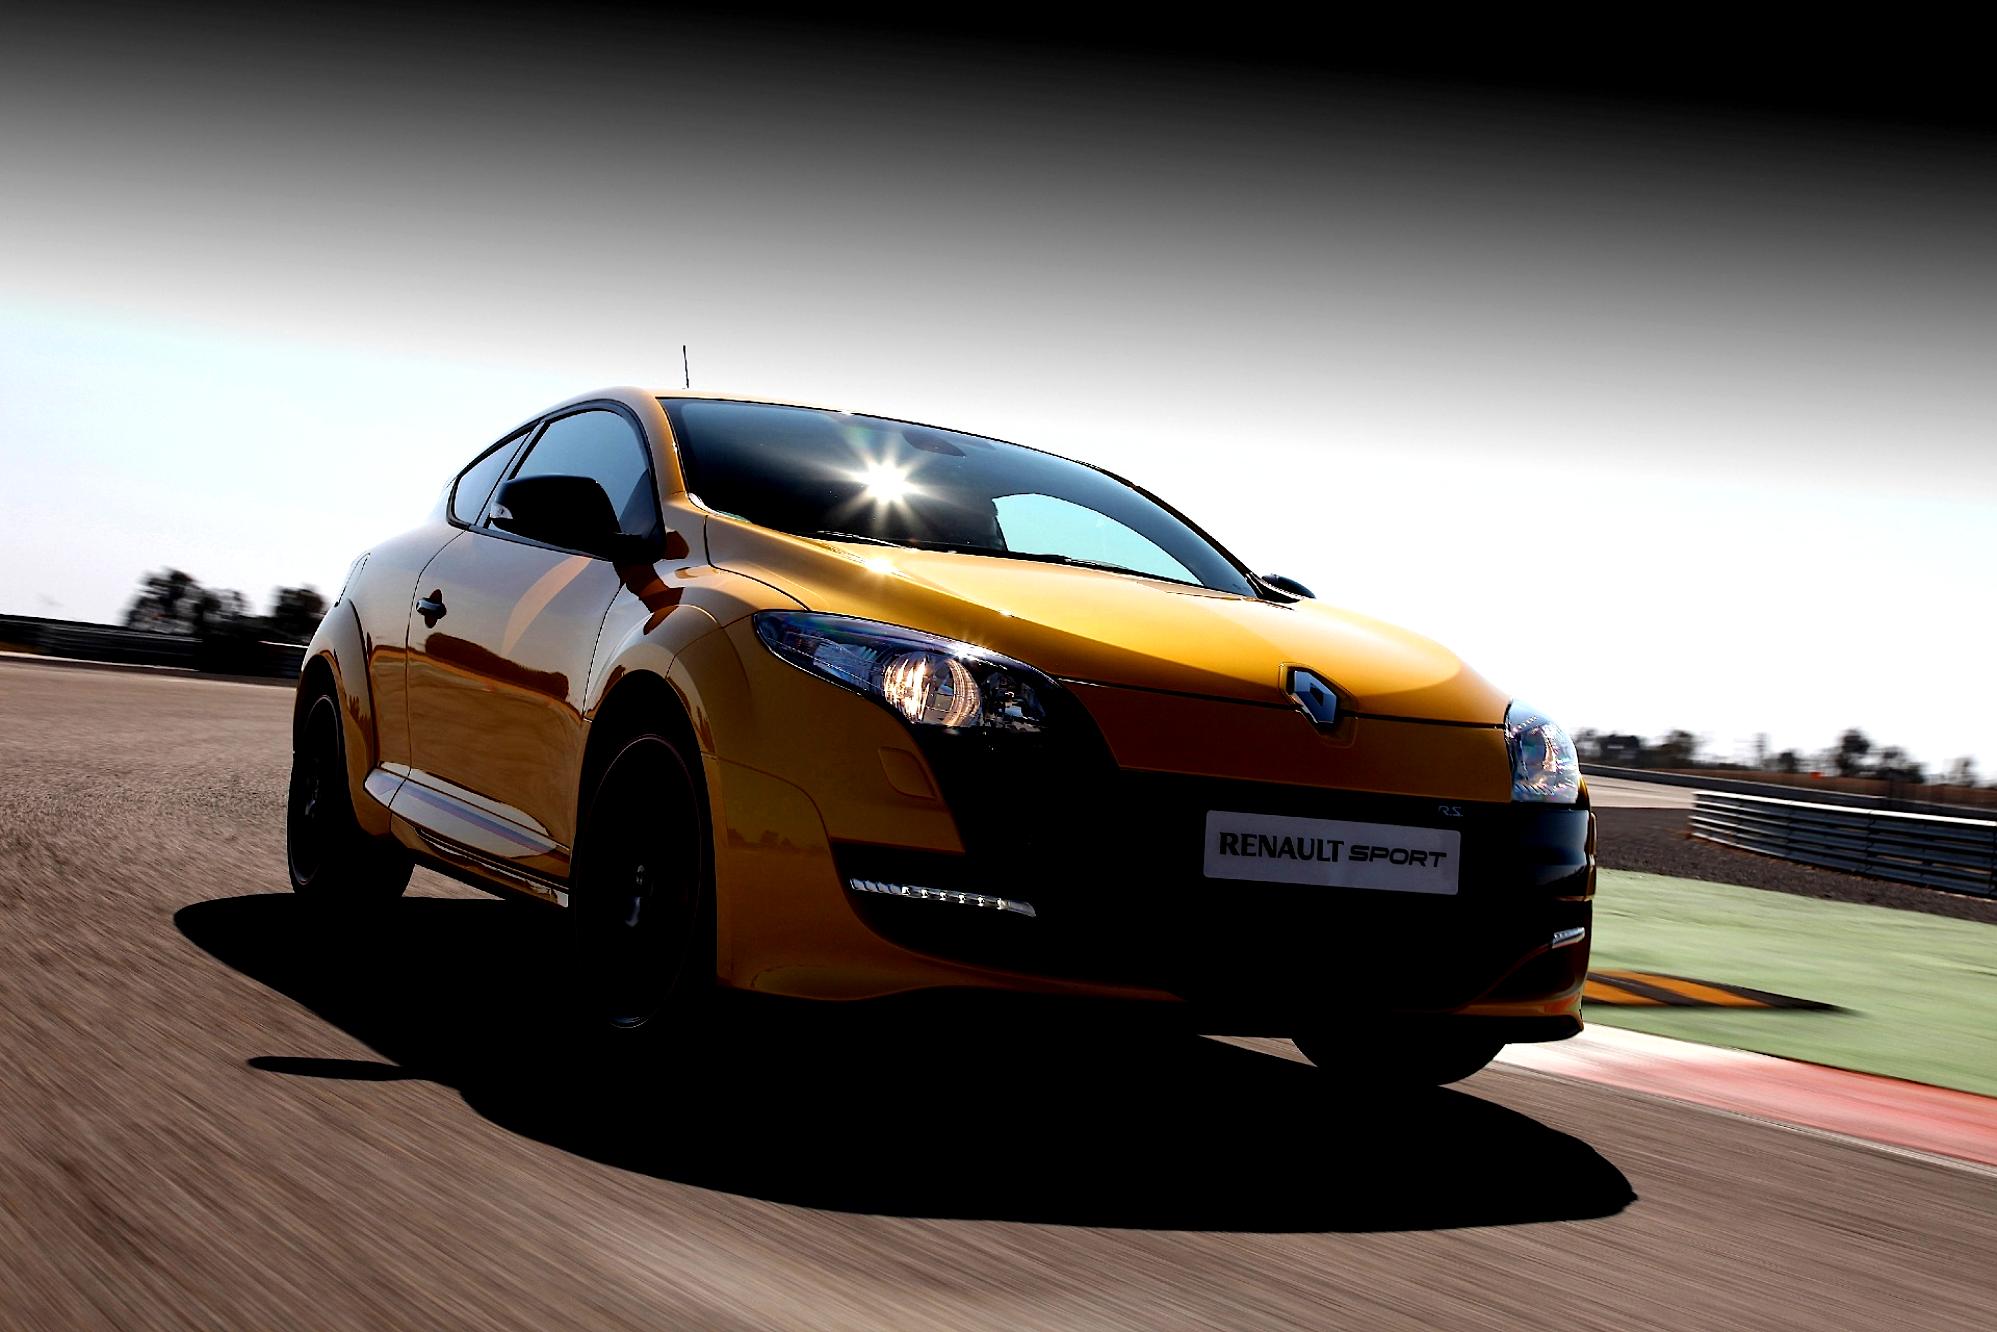 Renault Megane RS Coupe 2009 #59